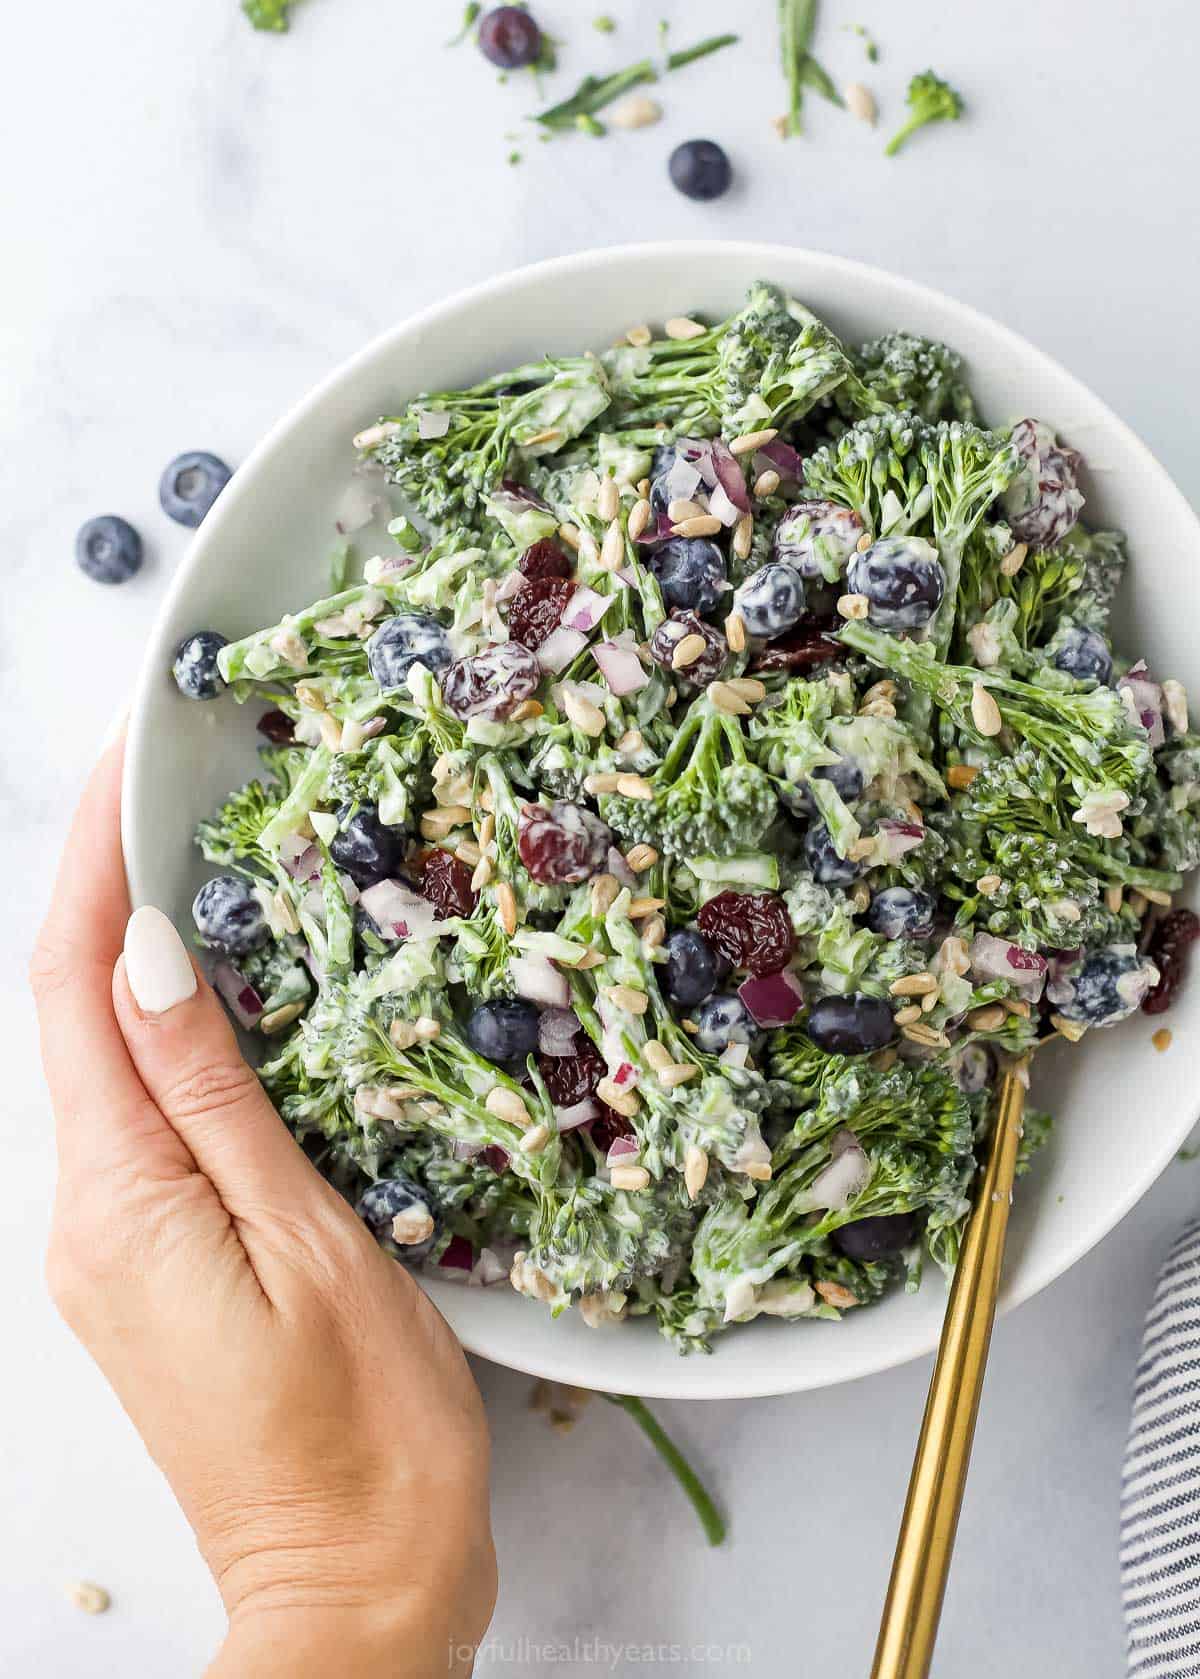 A hand holding a bowl of broccolini salad with fresh blueberries, sunflower seeds and dried cherries